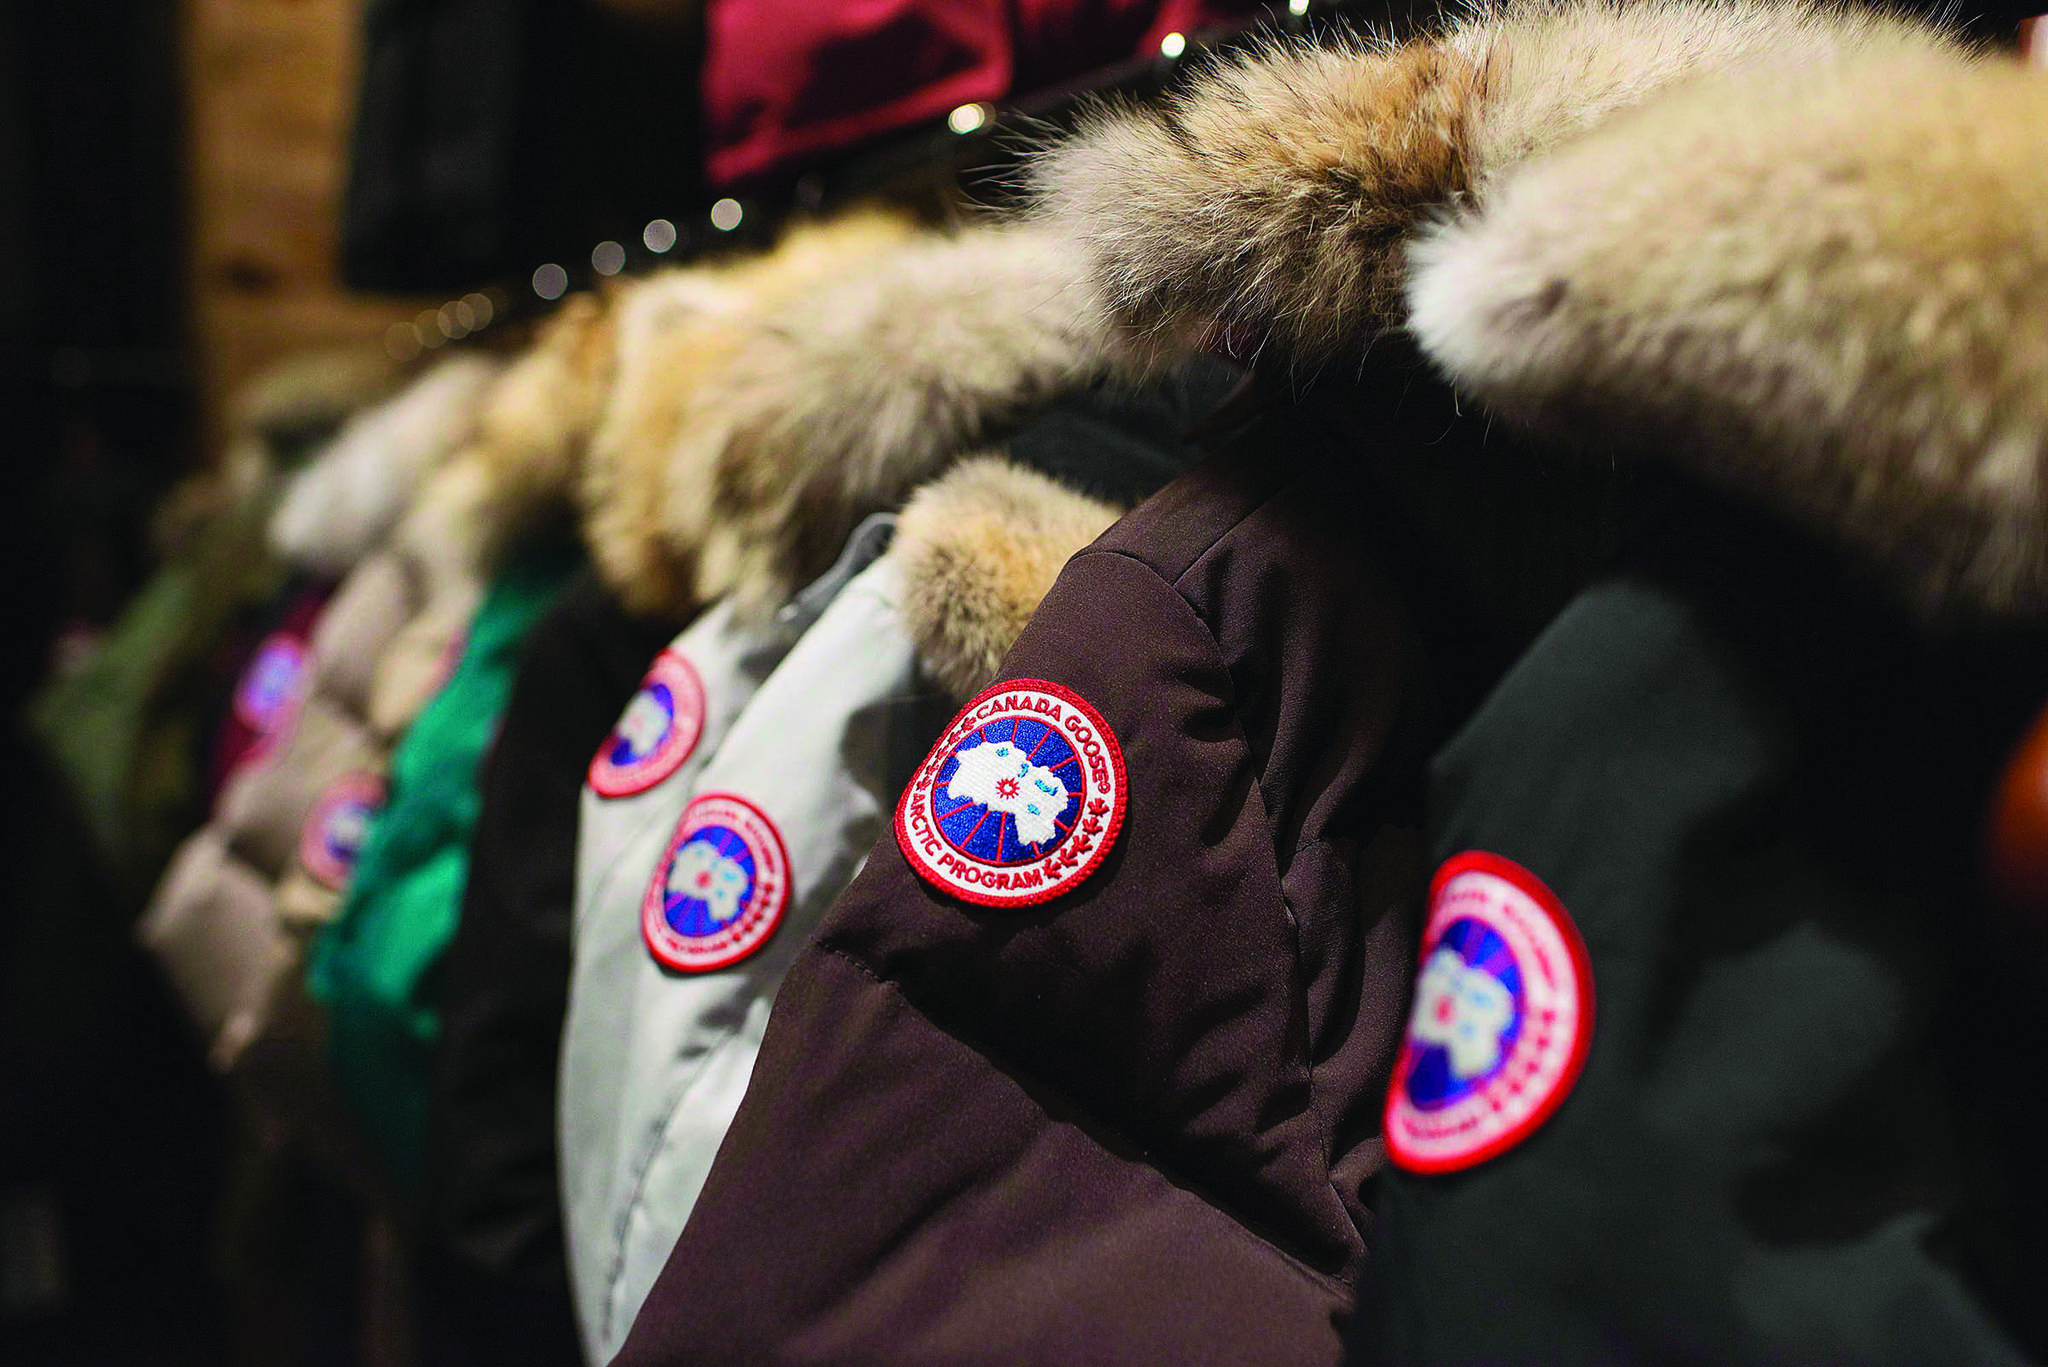 People robbed of Canada Goose coats at gunpoint in Chicago